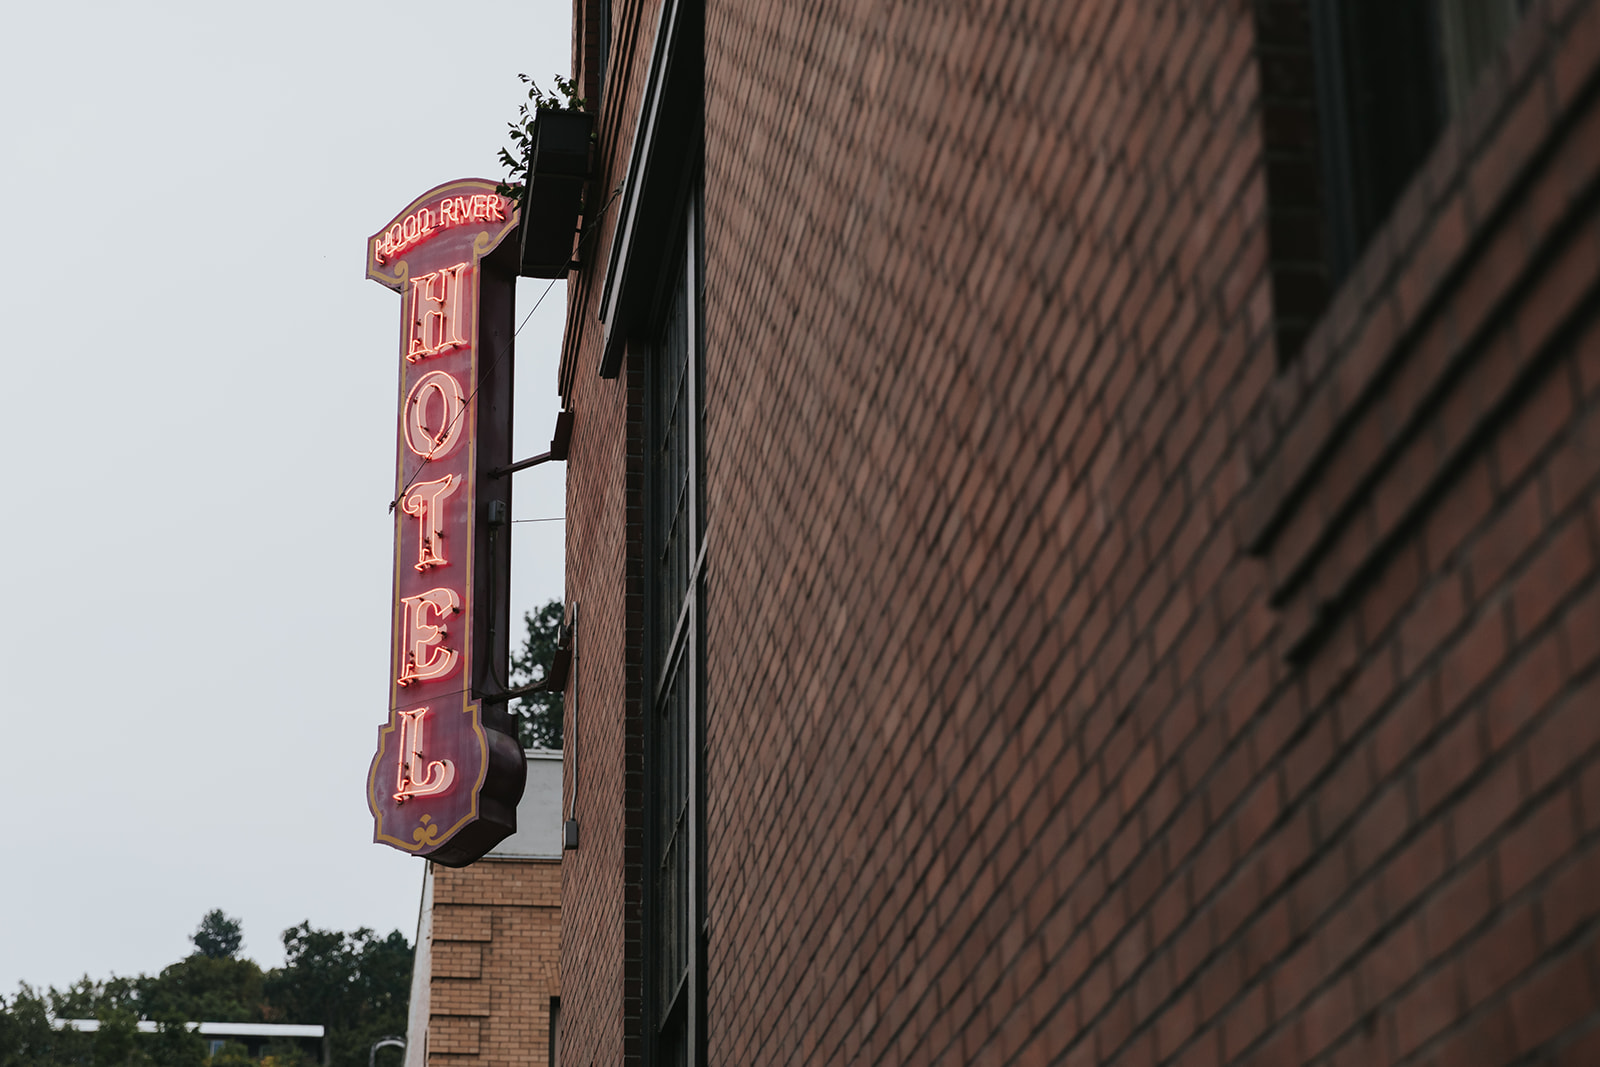 The exterior sign of the Hood River Hotel.